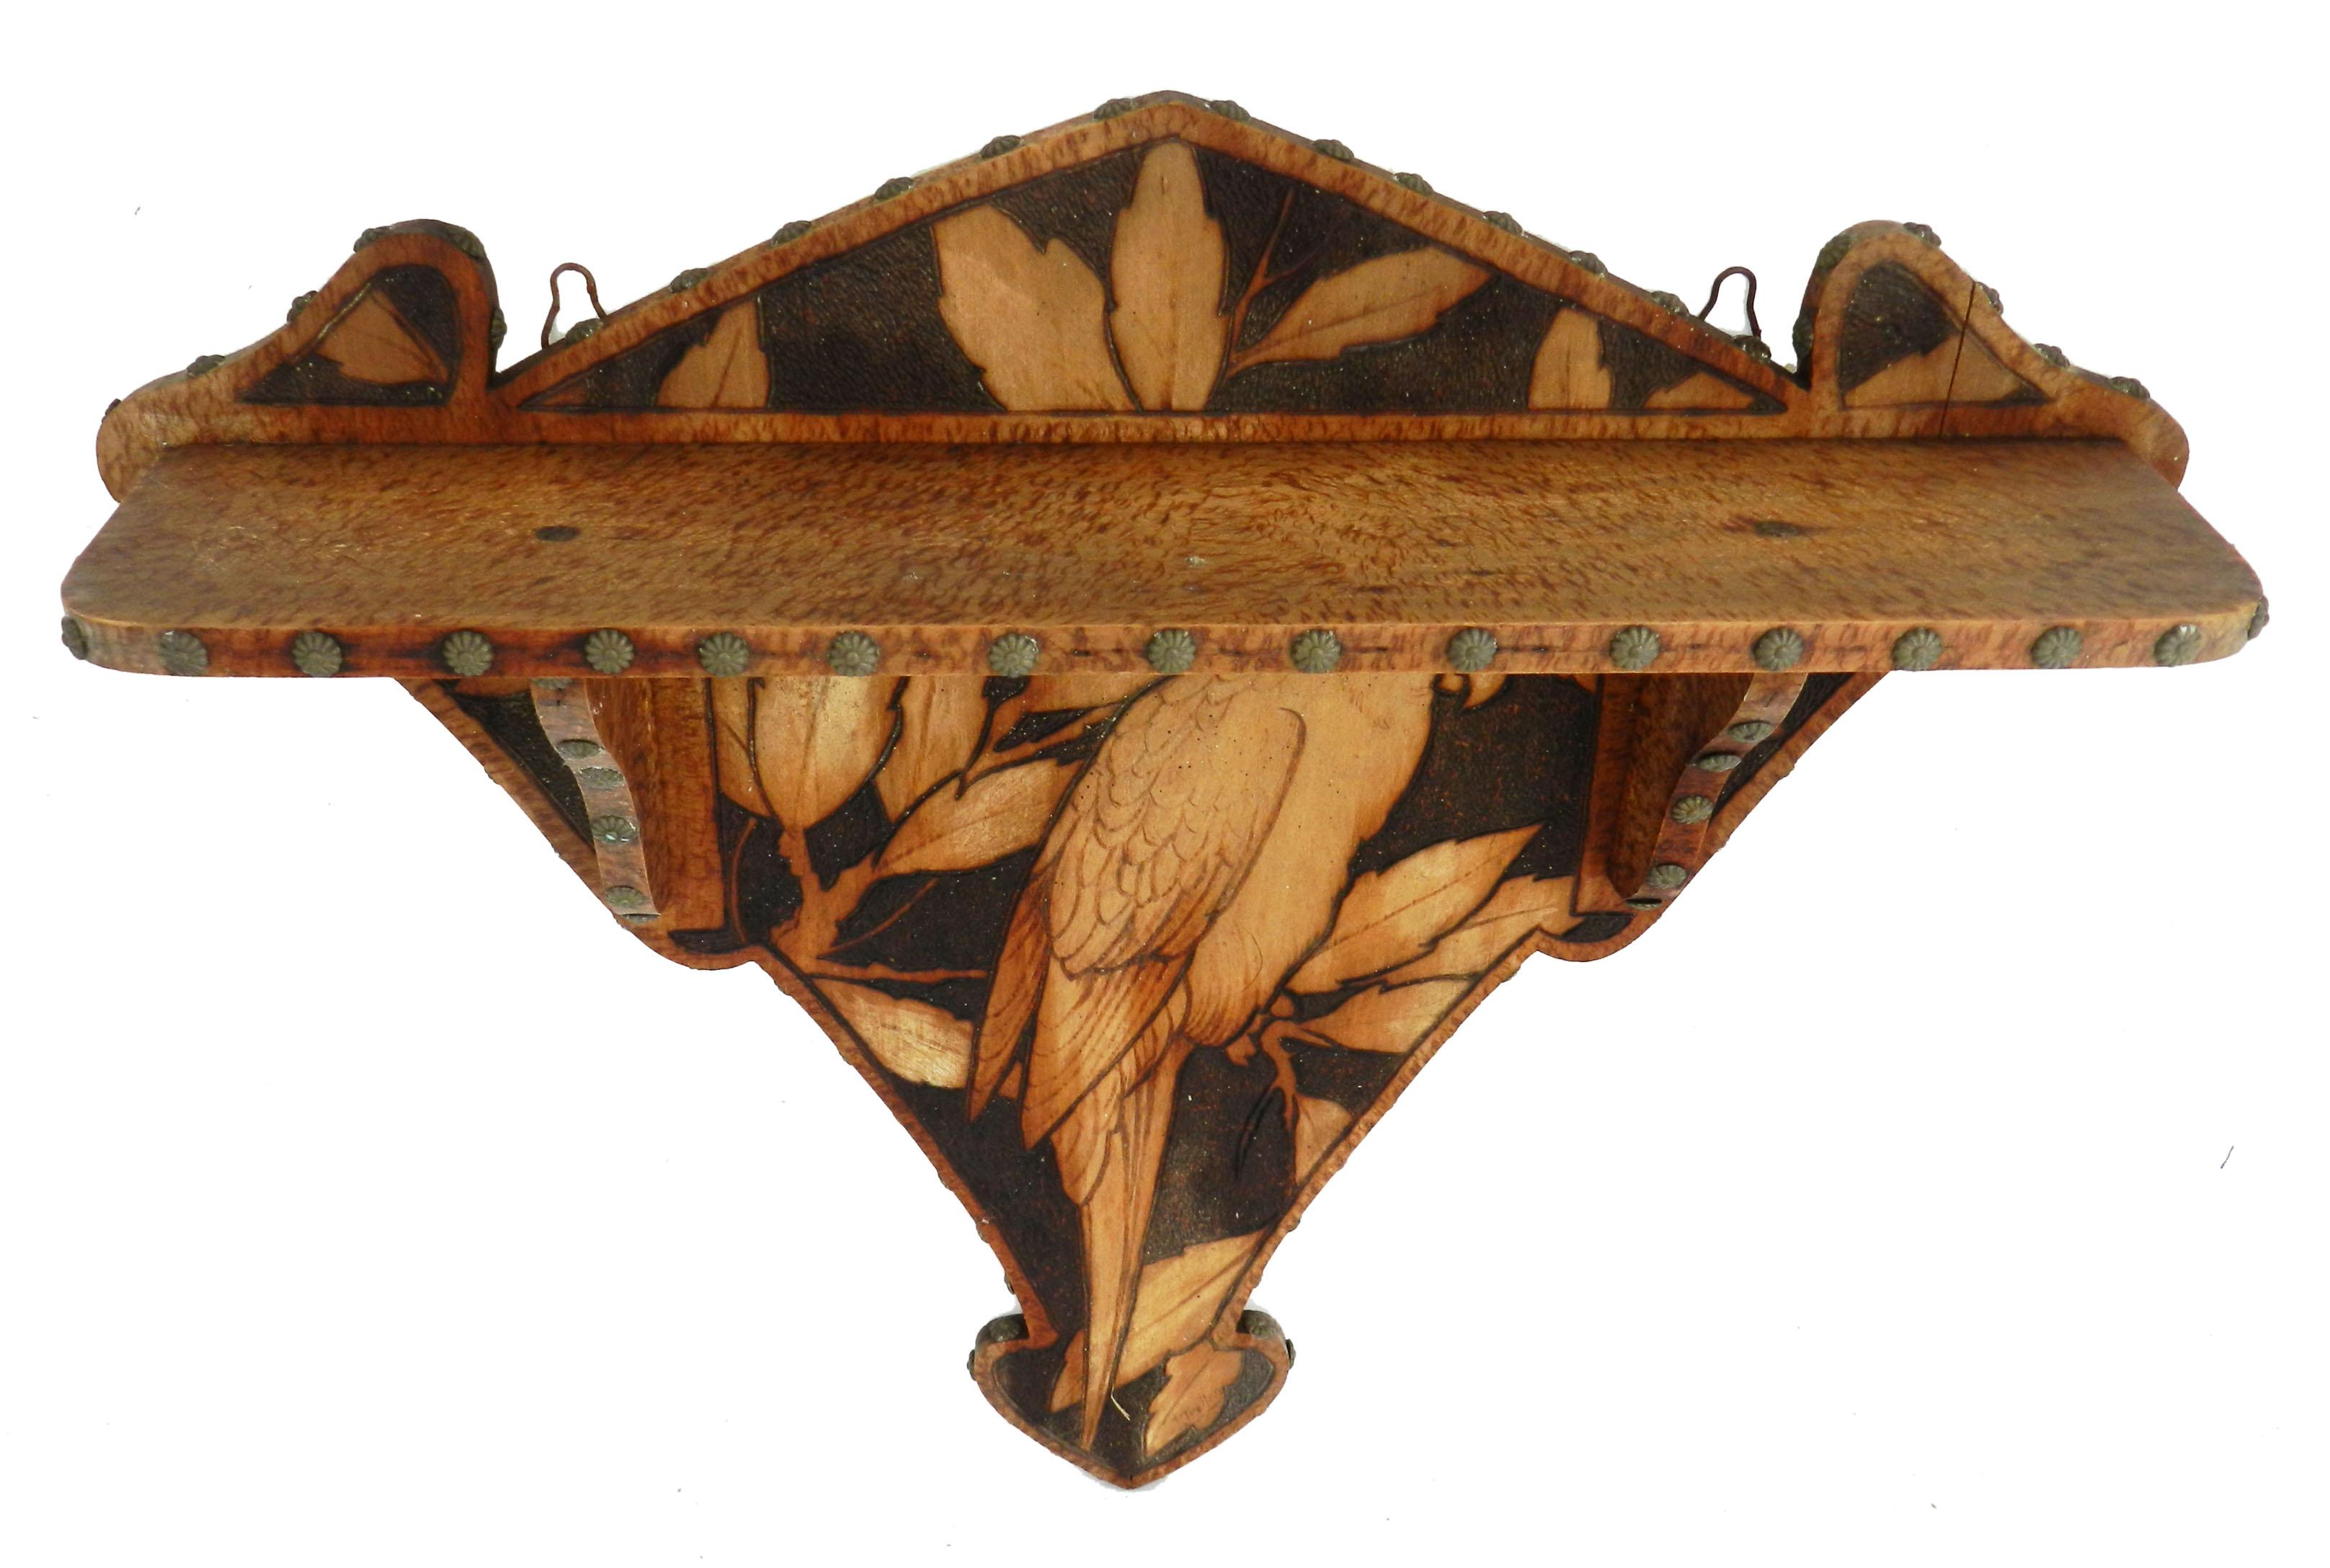 Art Deco wall shelf parrot wood, circa 1930
Pokerwork Pyrogravure Pyrograph
Unusual decorative with a parrot
One of a kind
Very good condition for its age wonderful patina with small joint that doesn't move in anyway.